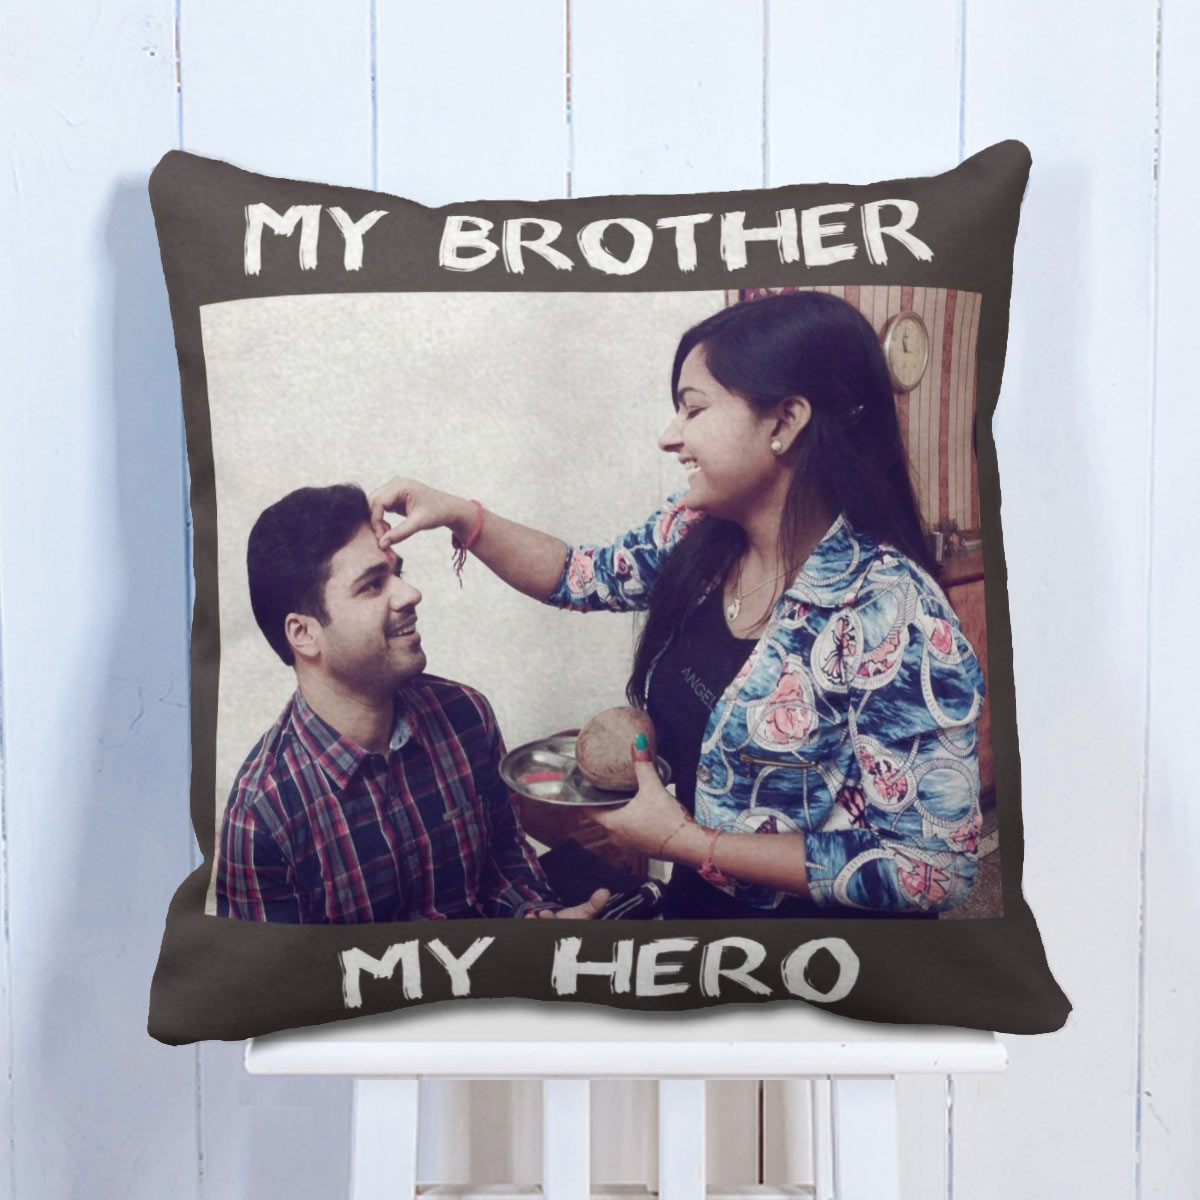 Happy Birthday Personalized Satin Pillow for Brother: Gift/Send Home Gifts  Online J11114563 |IGP.com